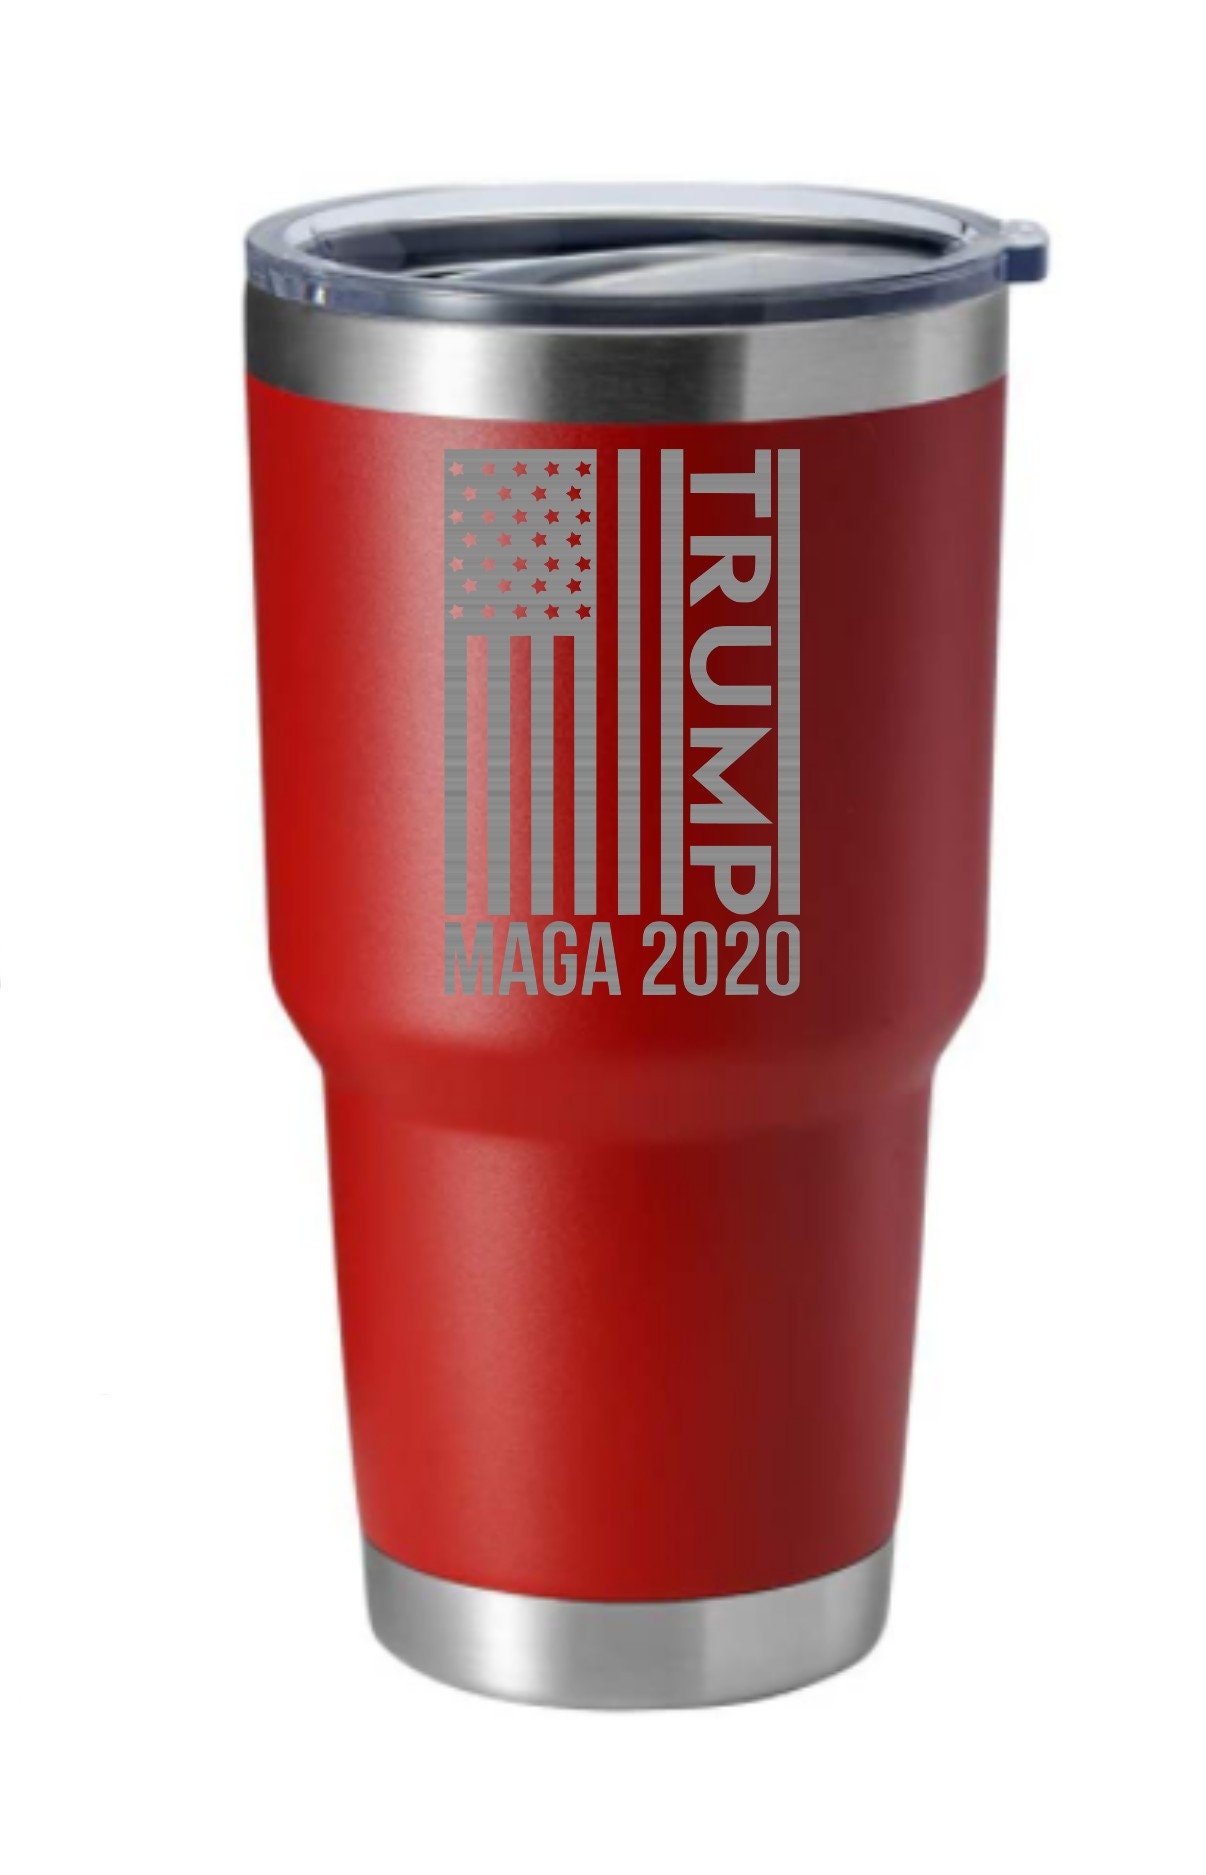 Custom RTIC Tumbler coated in Hidden White, Ridgeway Blue, Graphite Black  and Smith & Wesson® Red